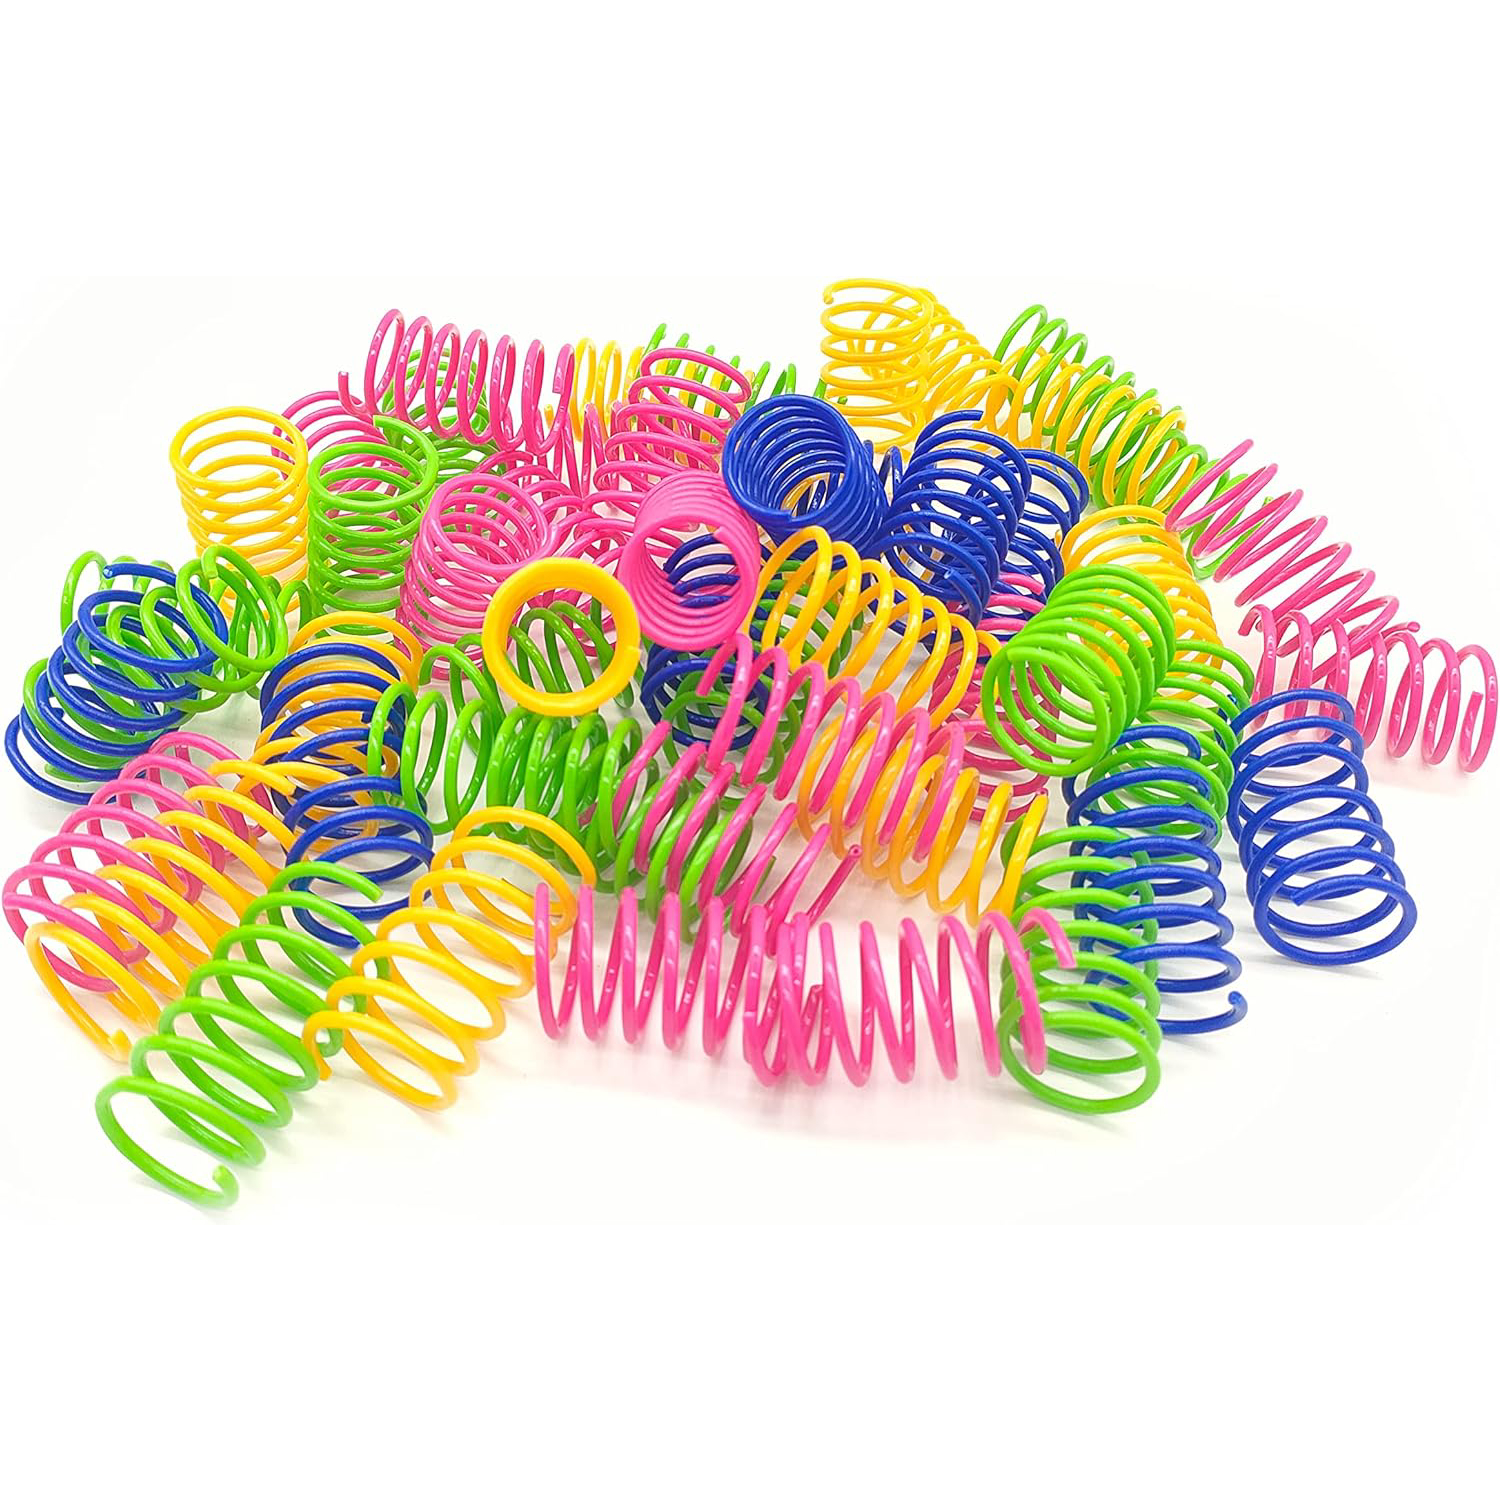 YULOYI Cat Spring Toys 30 Packs, Plastic Colorful Springs Cat Toys for Cat Kitten Pets New